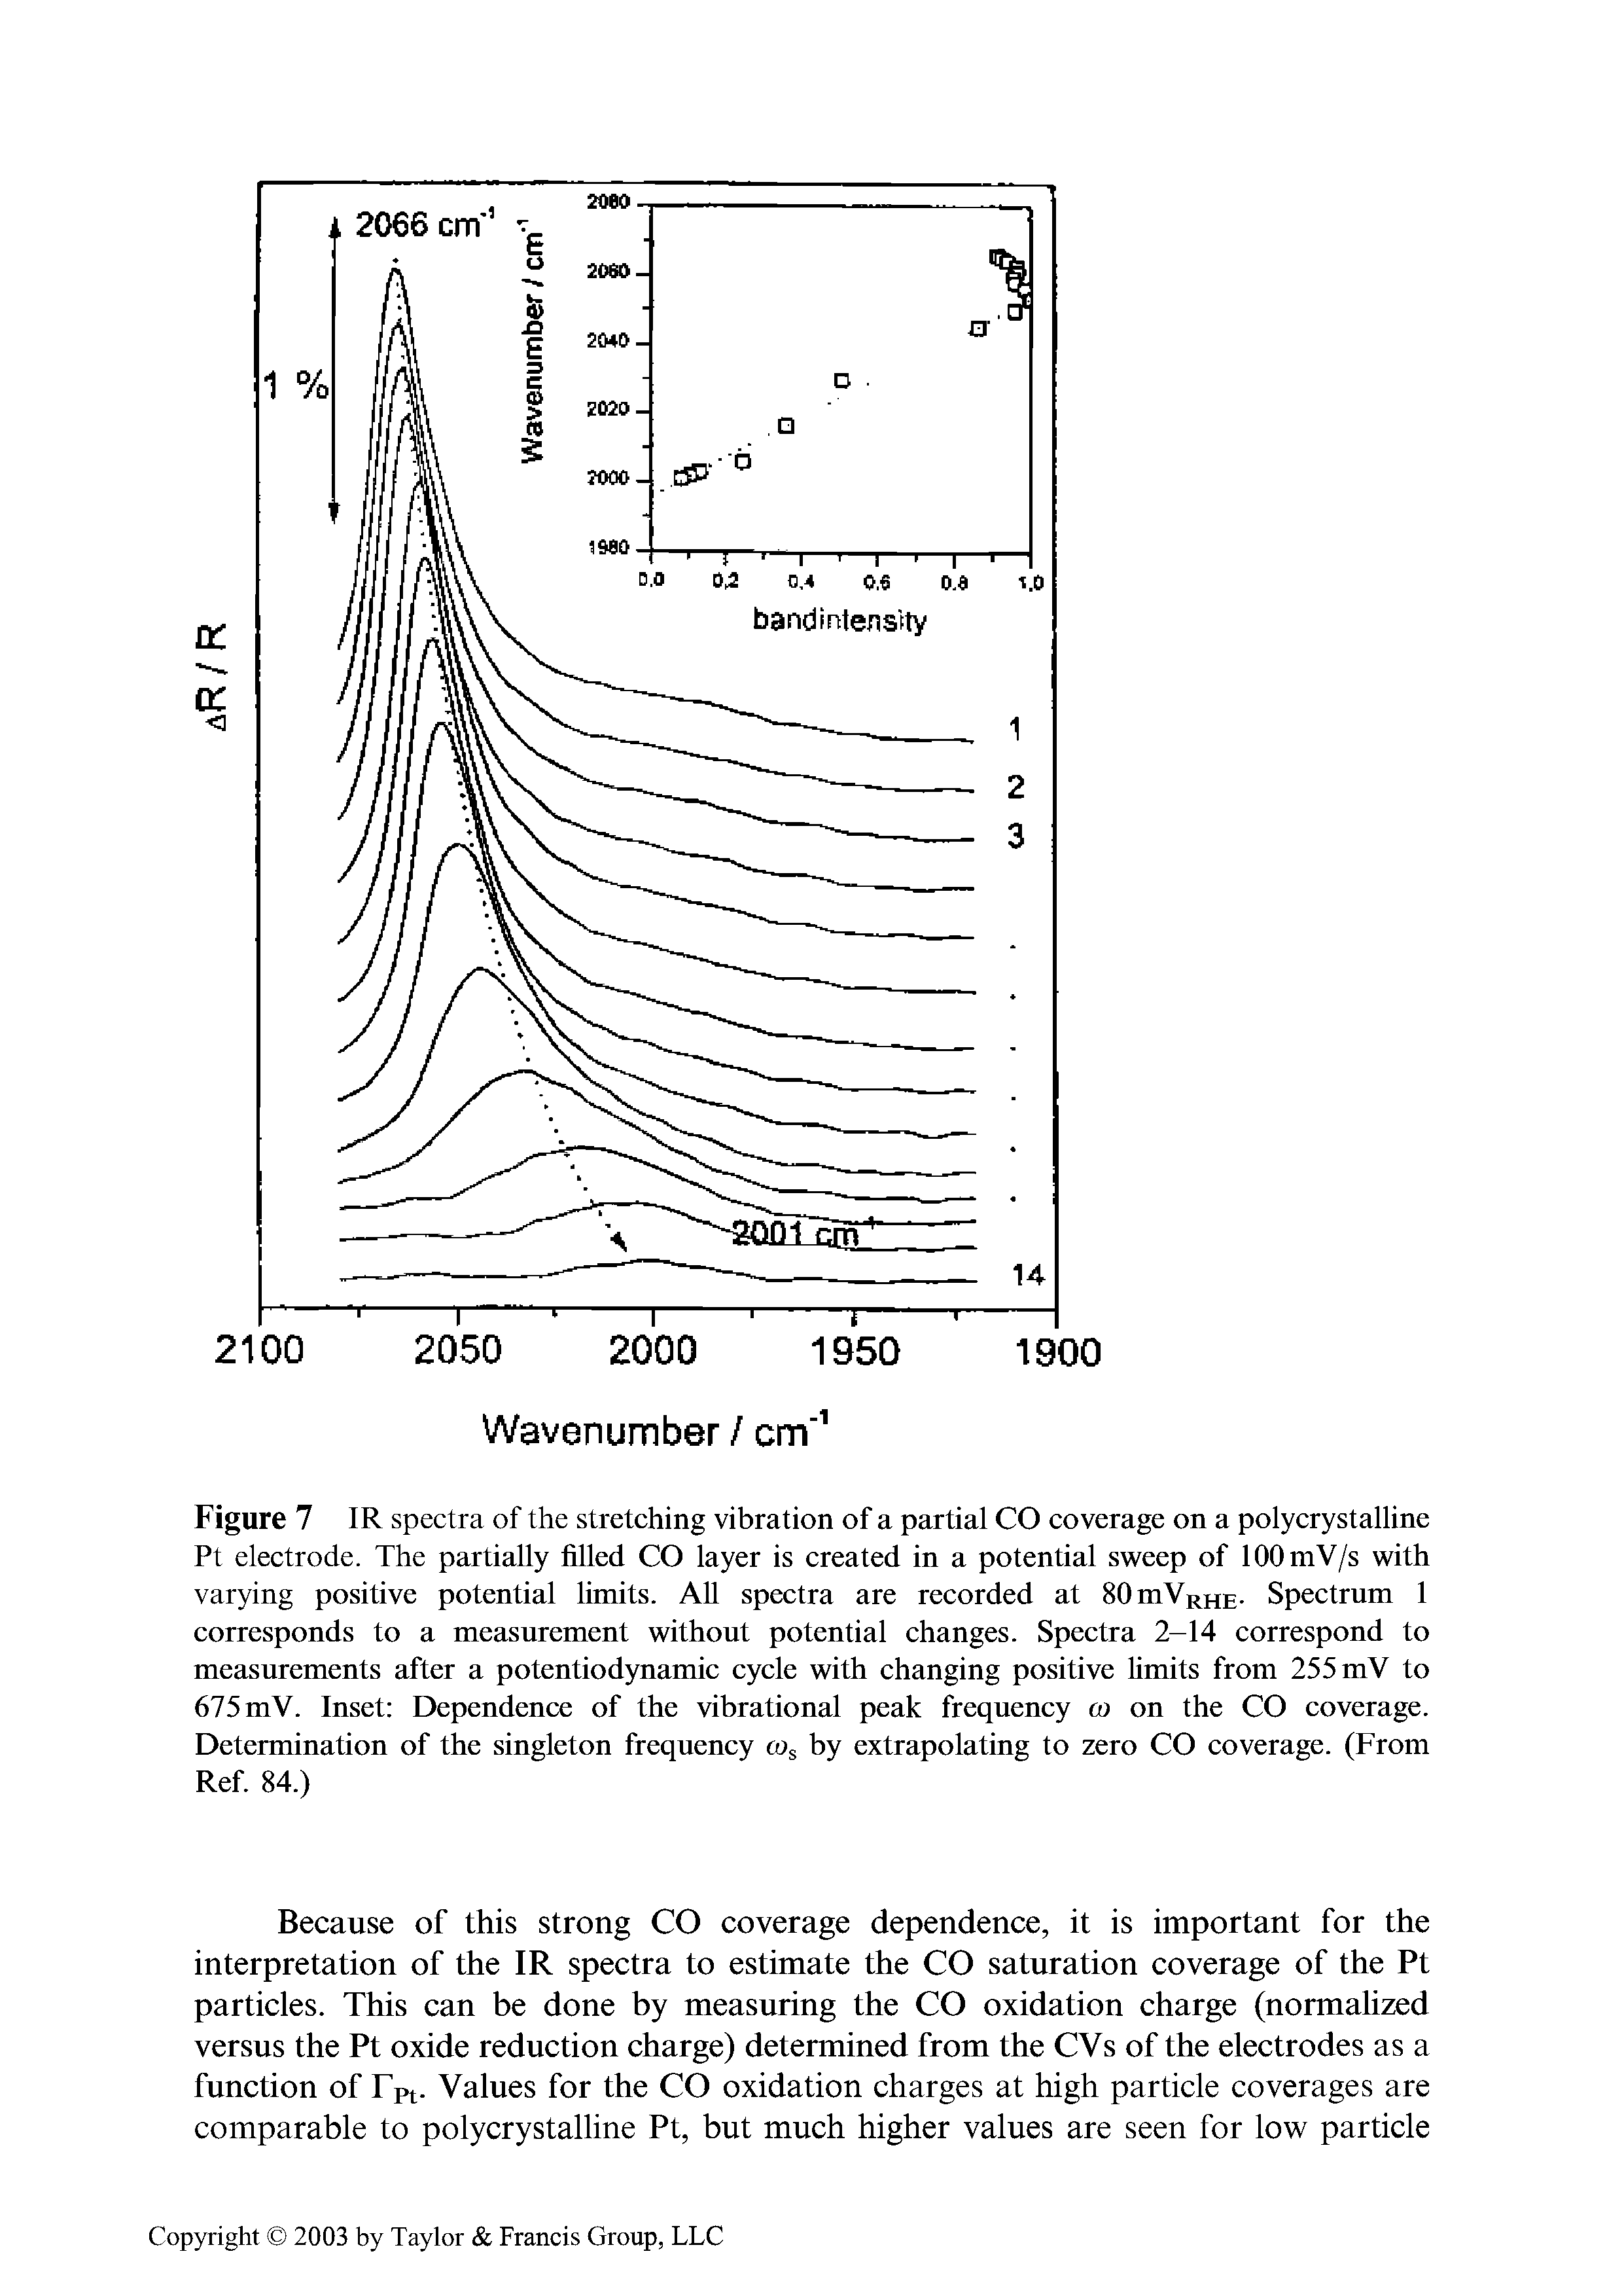 Figure 7 IR spectra of the stretching vibration of a partial CO coverage on a polycrystalline Pt electrode. The partially filled CO layer is created in a potential sweep of lOOmV/s with varying positive potential limits. All spectra are recorded at SOmVRHE- Spectrum 1 corresponds to a measurement without potential changes. Spectra 2-14 correspond to measurements after a potentiodynamic cycle with changing positive limits from 255 mV to 675 mV. Inset Dependence of the vibrational peak frequency co on the CO coverage. Determination of the singleton frequency cOs by extrapolating to zero CO coverage. (From Ref. 84.)...